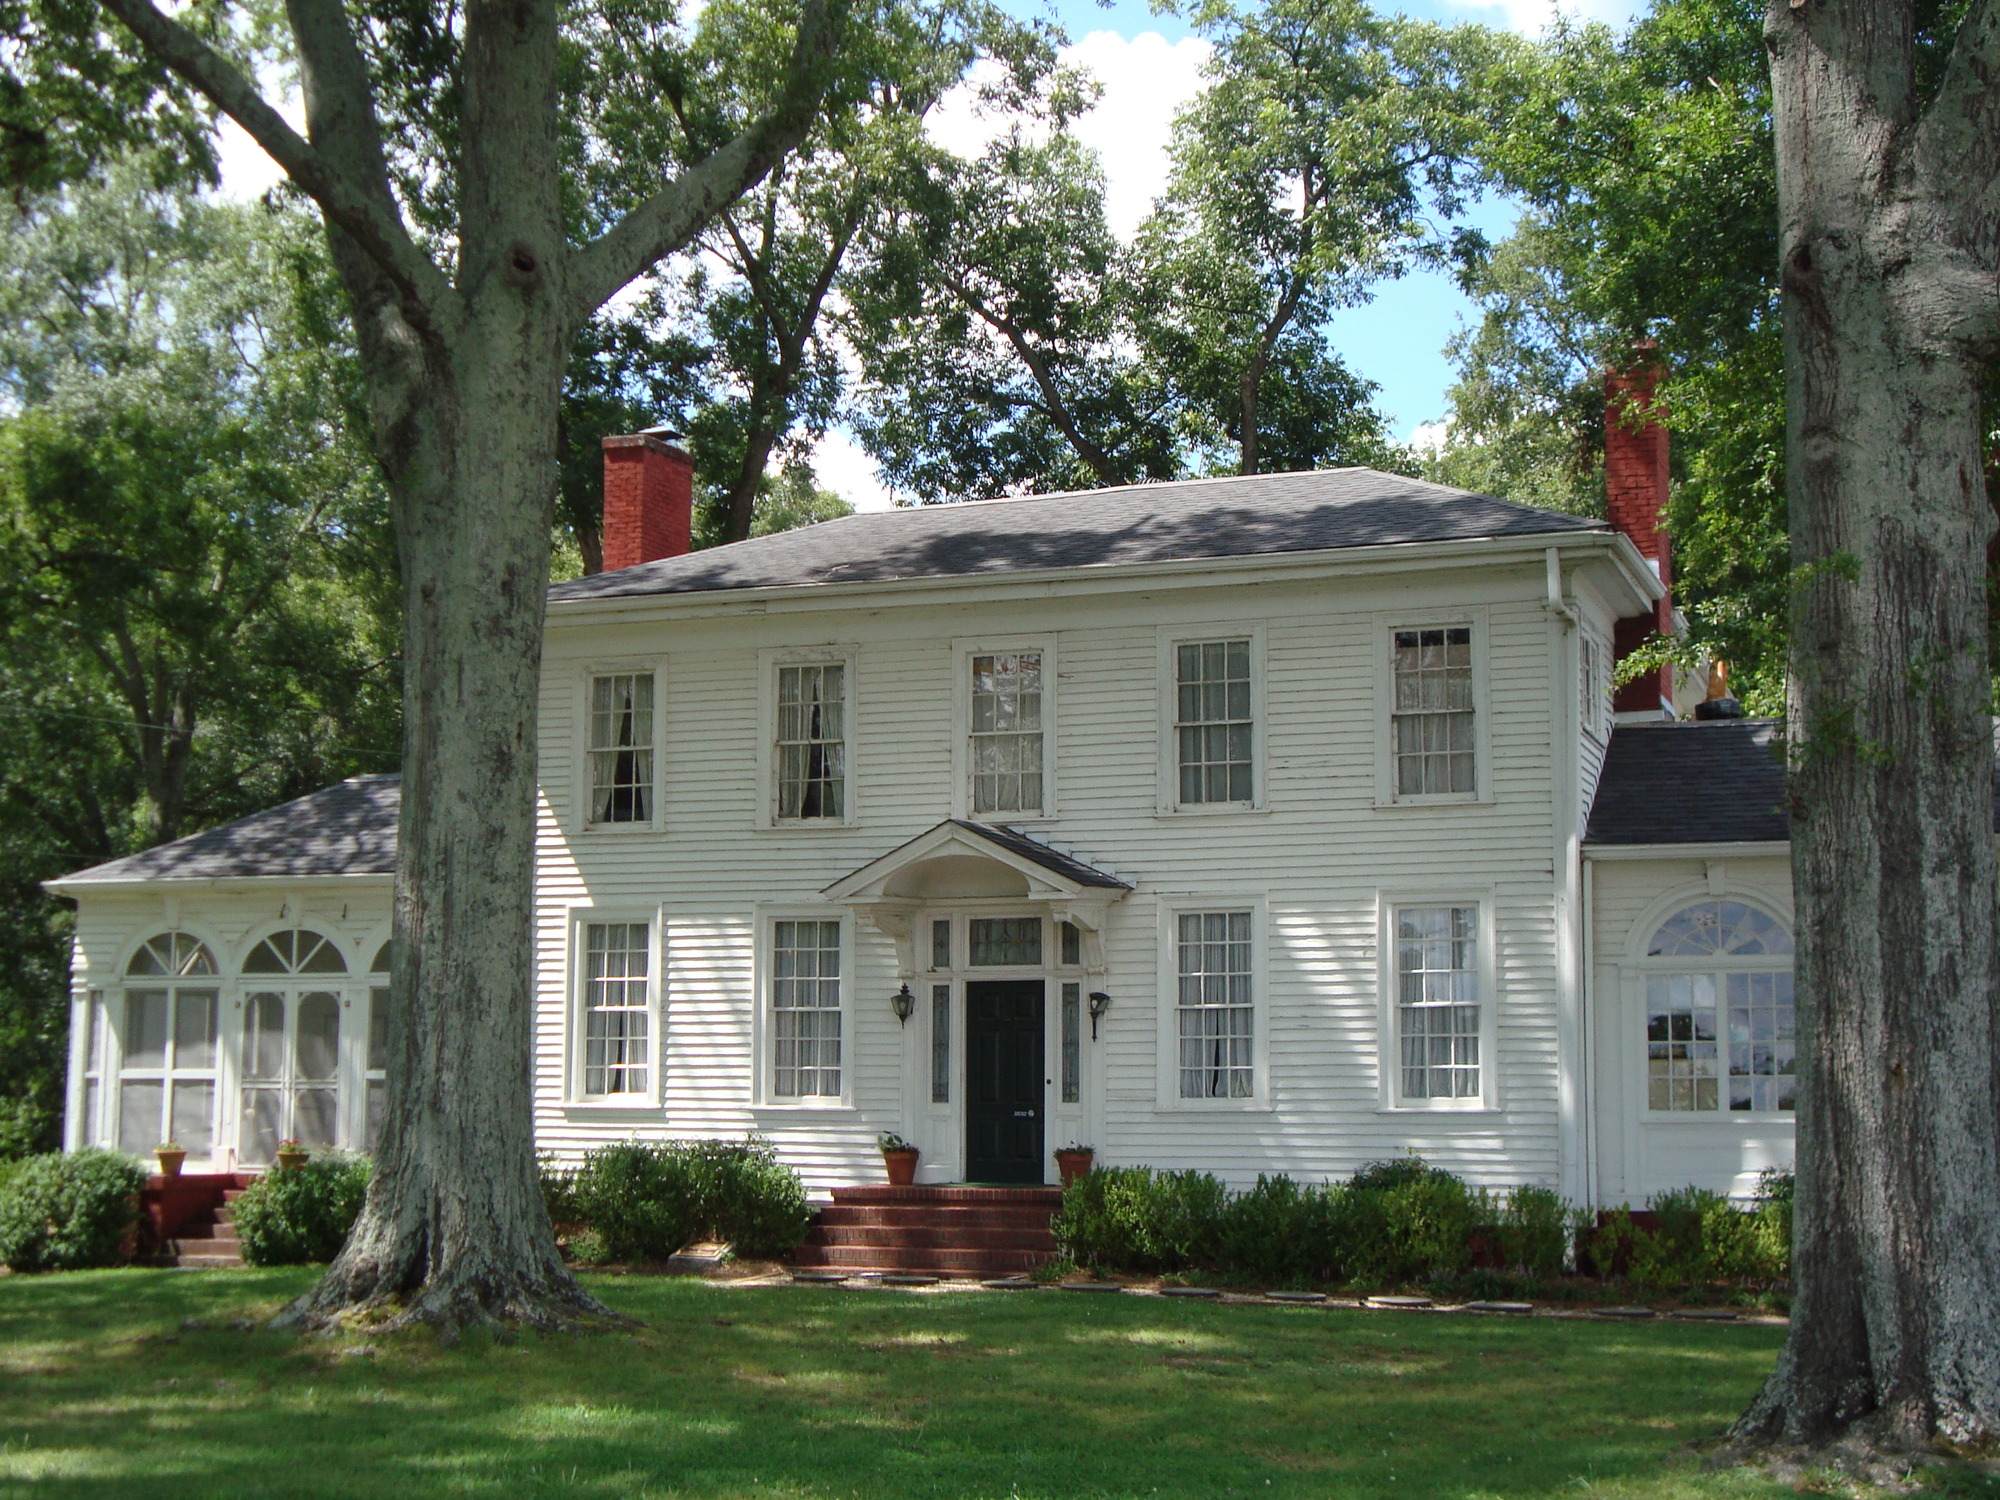 A frontal view of the Chieftains Museum, Major Ridge Home in Rome, Georgia